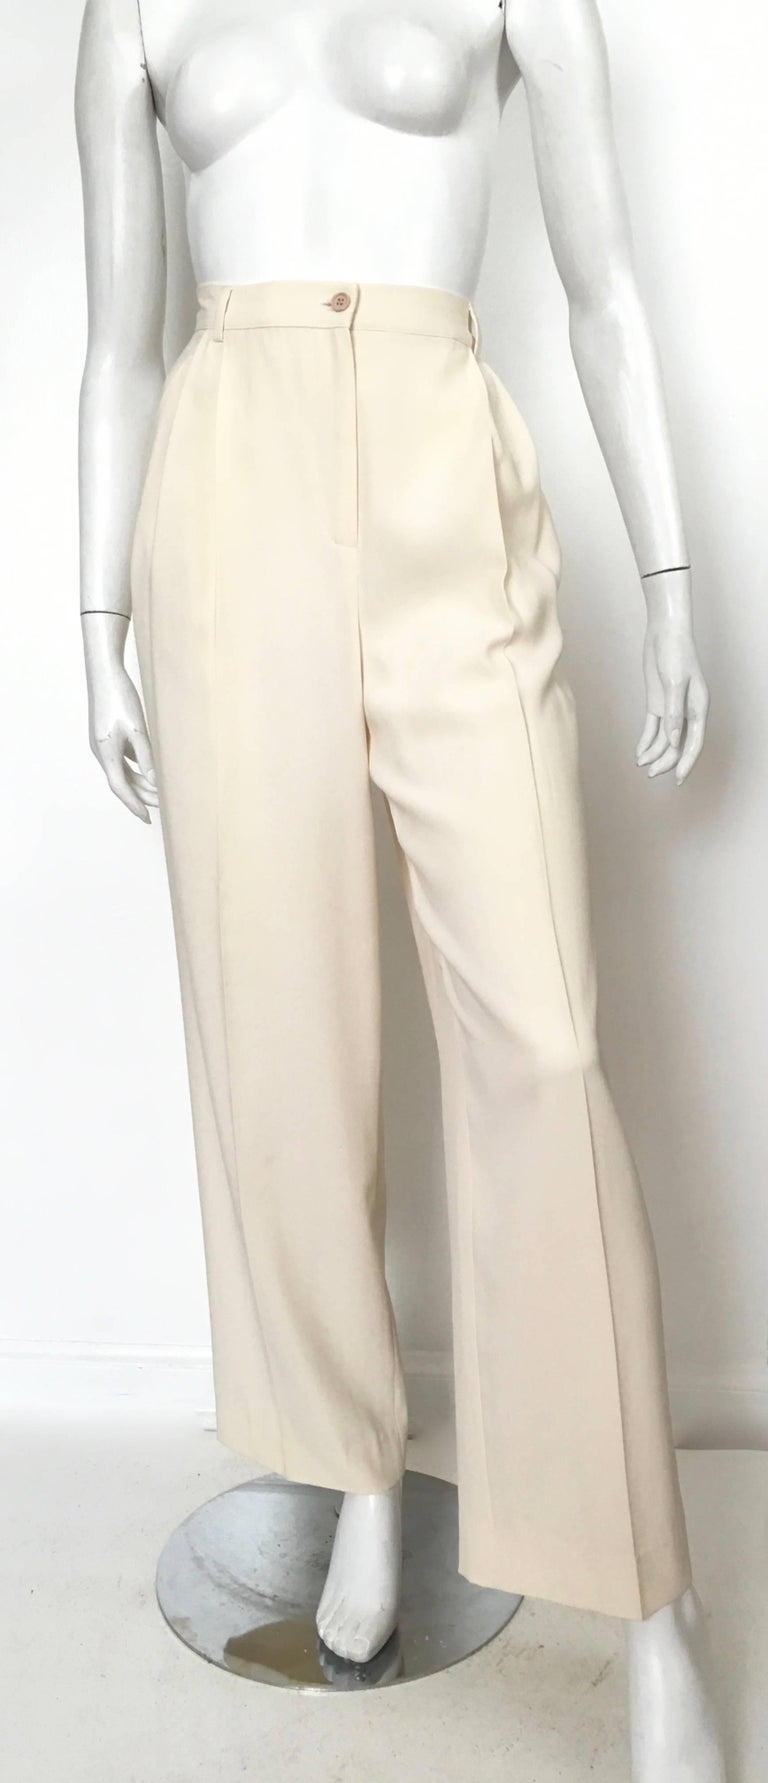 Valentino Cream Pleated Pants with Pockets Size 8. at 1stdibs